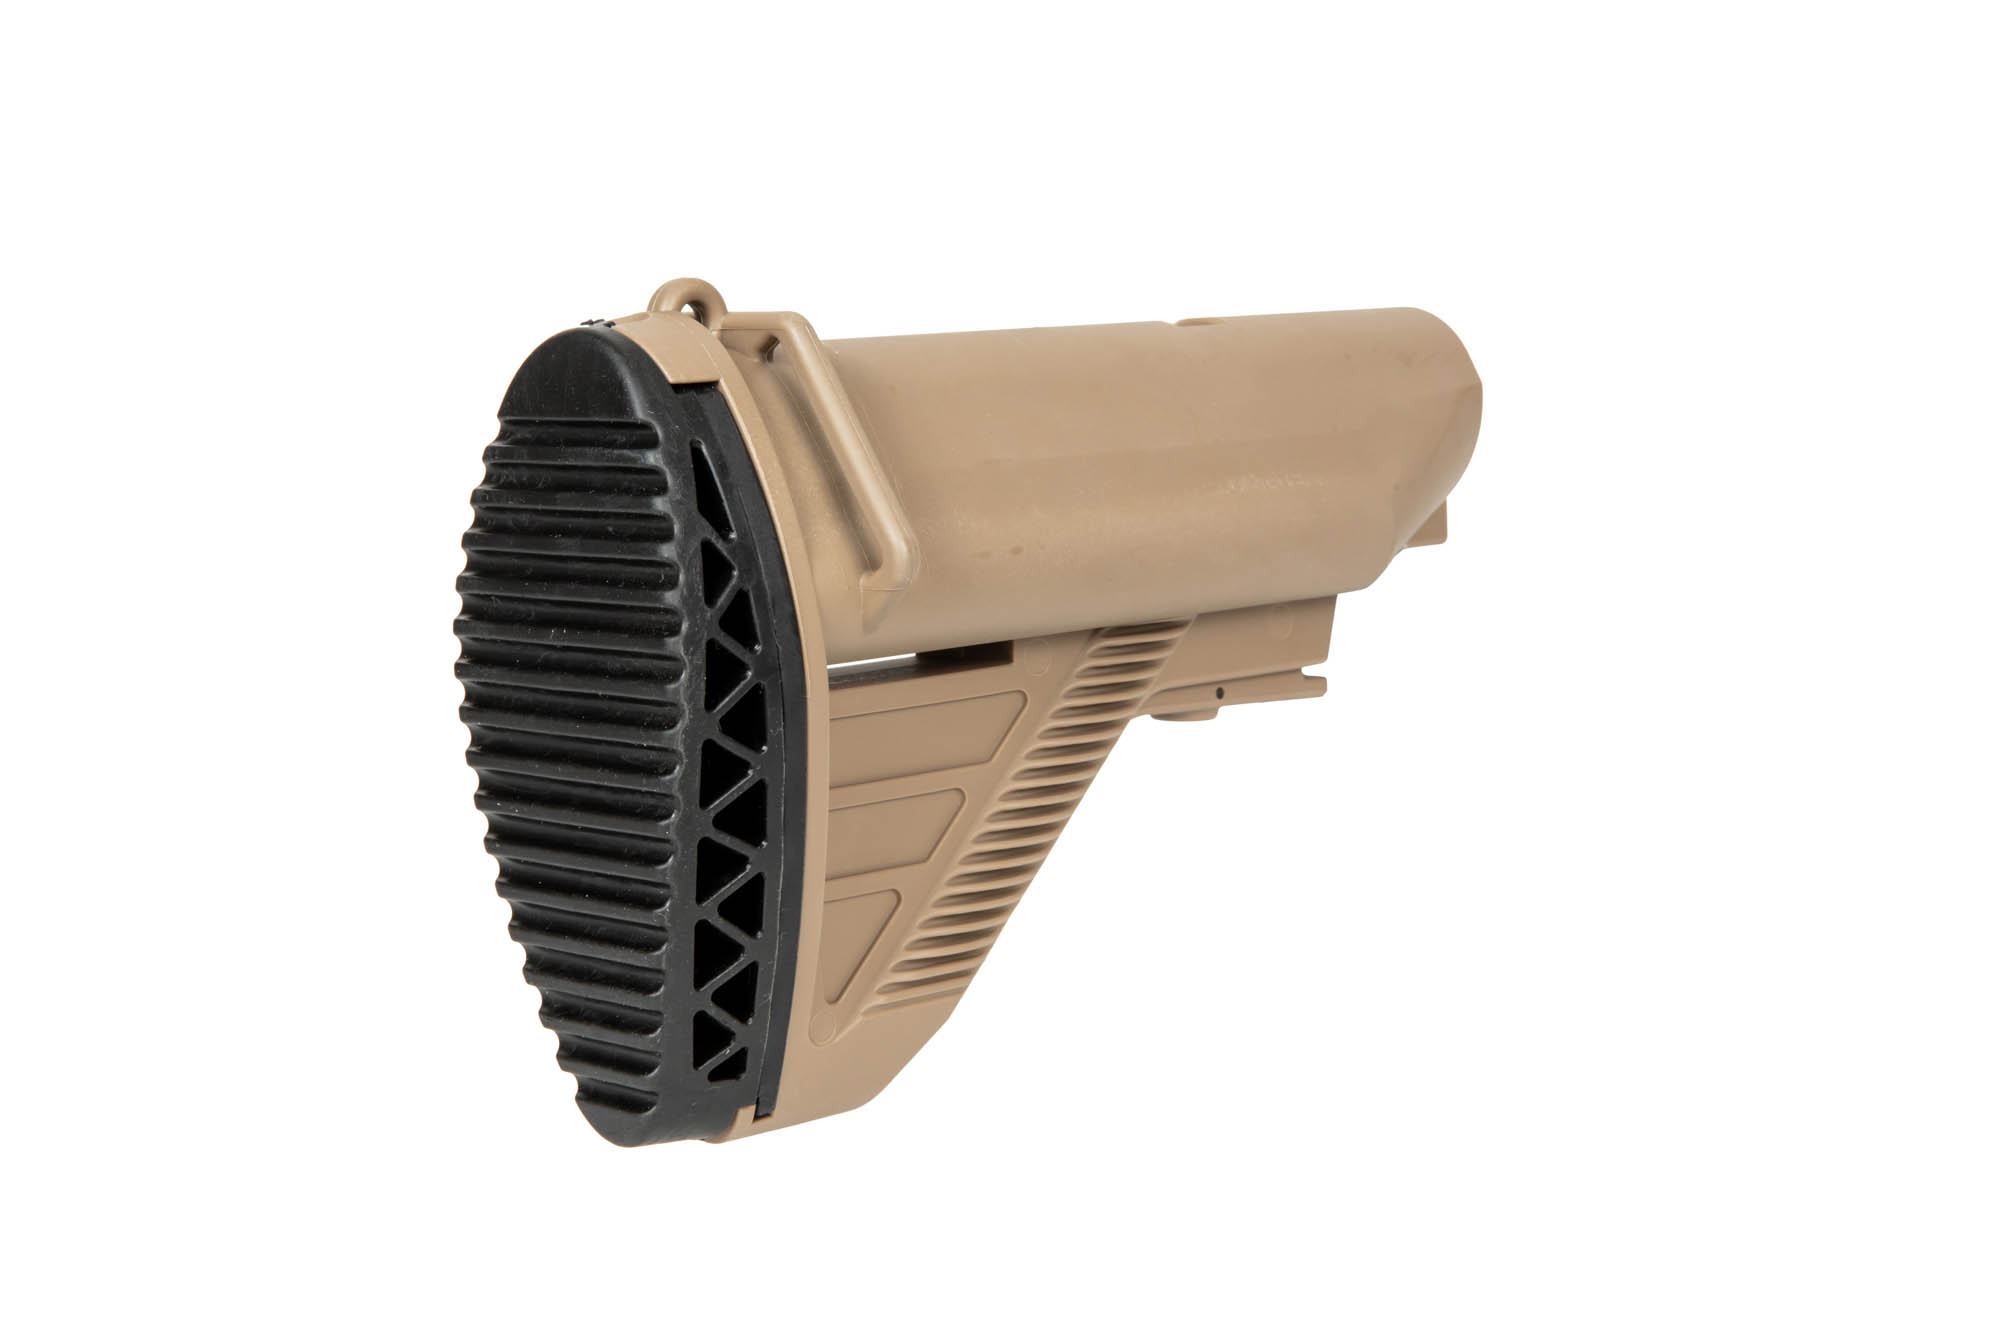 Polymer Stock for 416 | HM0399 - tan by DBOY on Airsoft Mania Europe